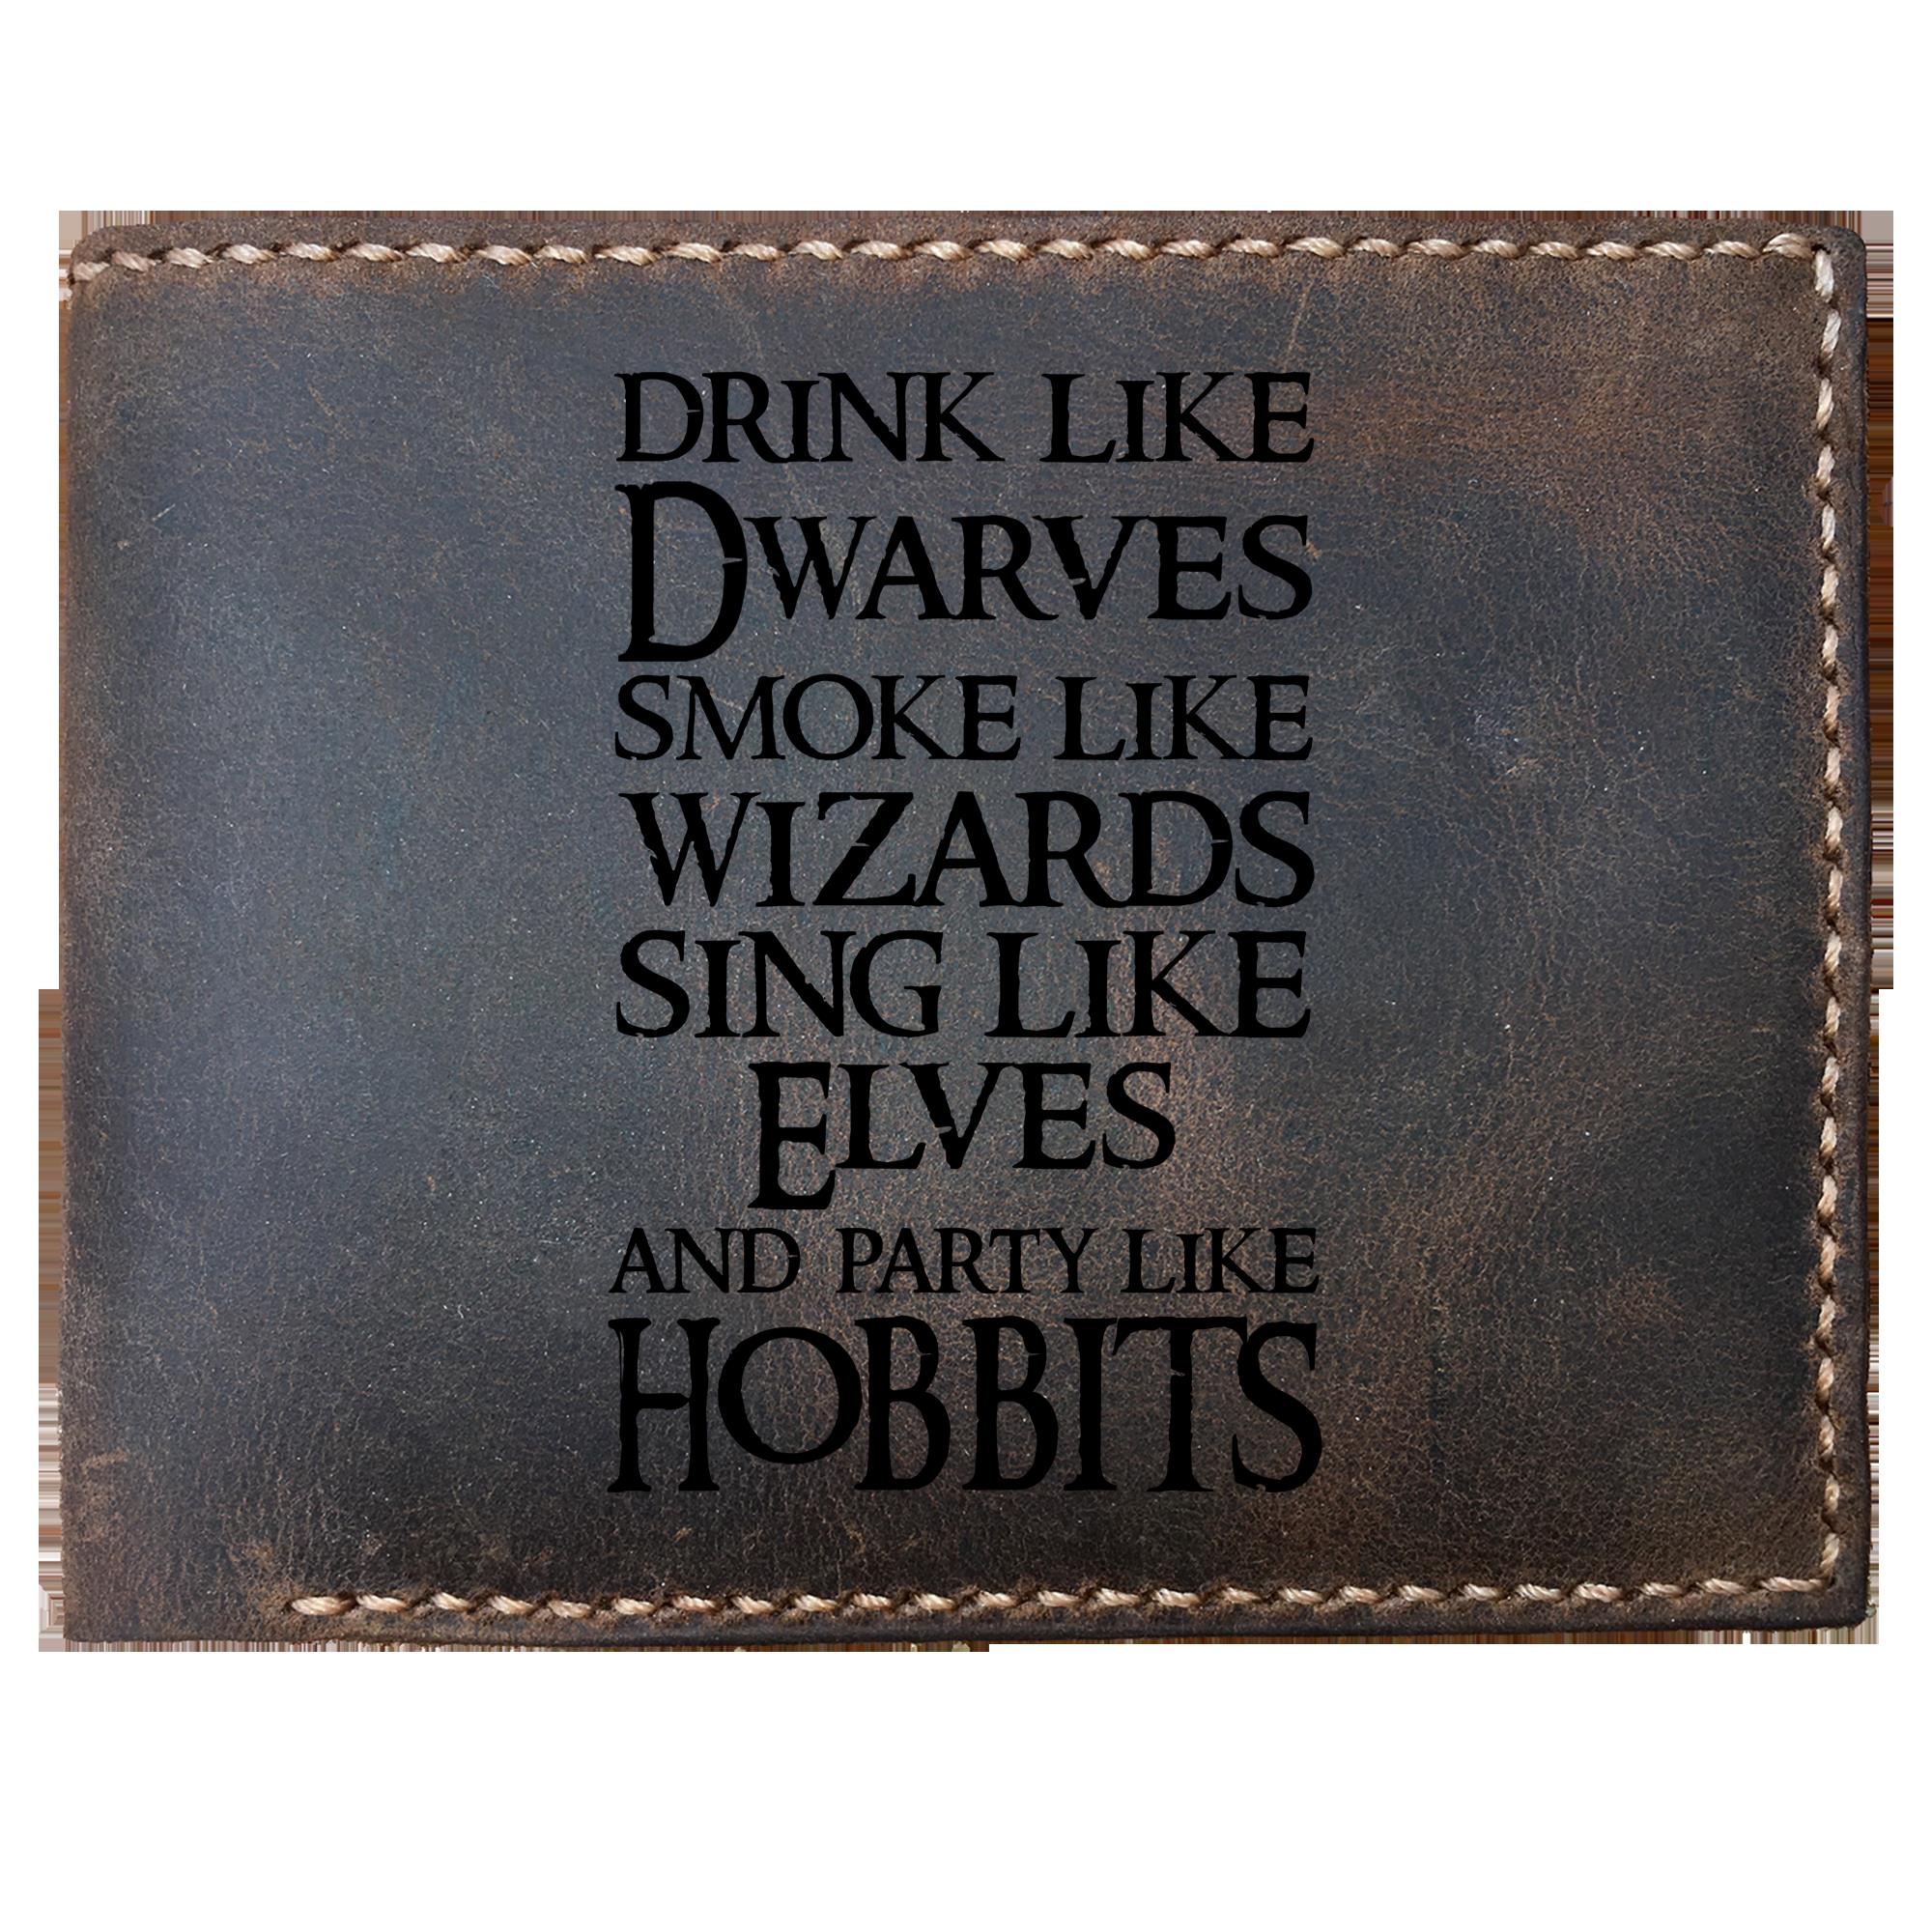 Skitongifts Funny Custom Laser Engraved Bifold Leather Wallet For Men, Drink Like Dwarves Smoke Like Wizards Sing Like Elves And Party Like Hobbits